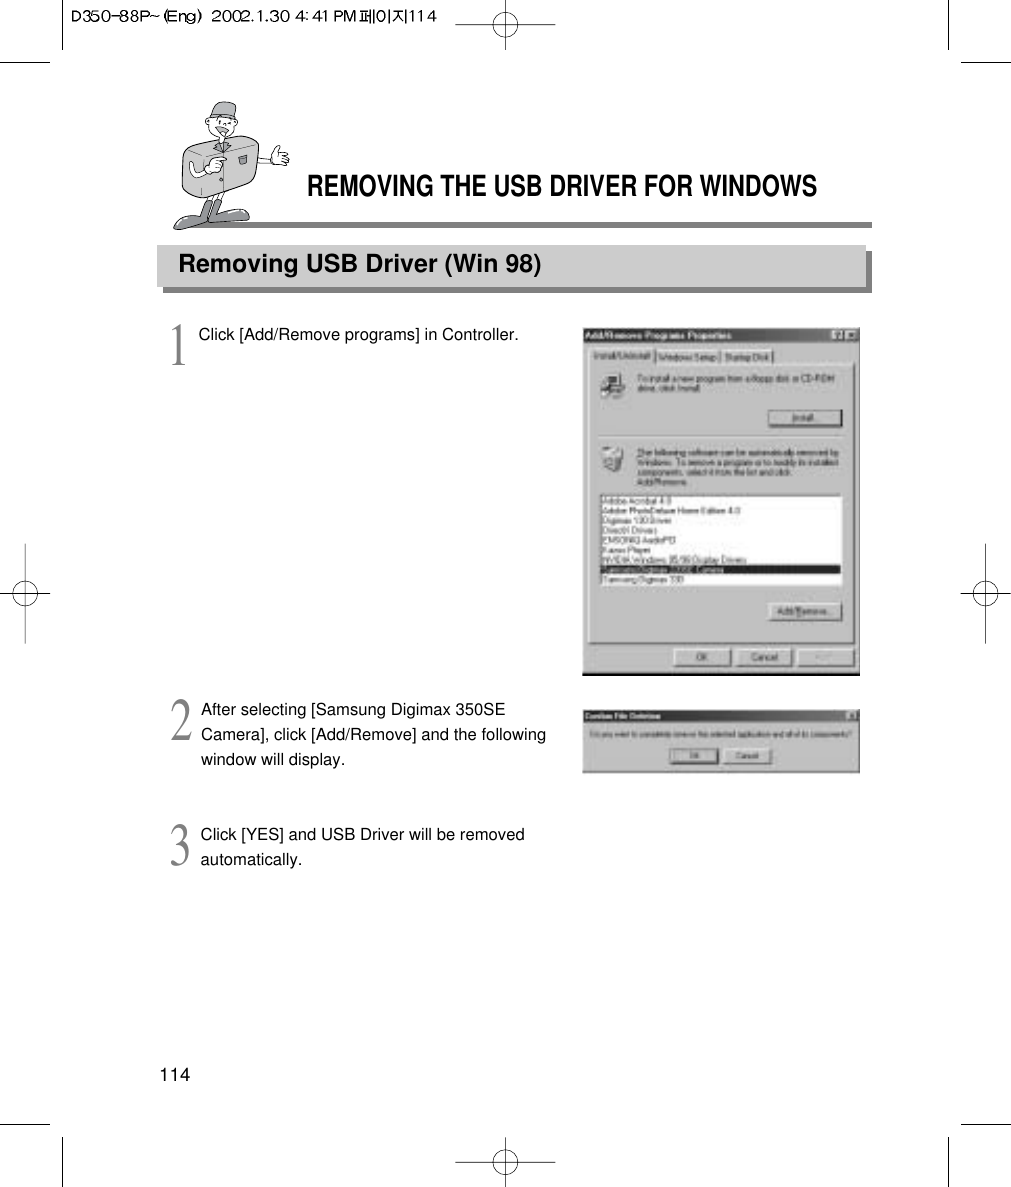 REMOVING THE USB DRIVER FOR WINDOWSRemoving USB Driver (Win 98)1141Click [Add/Remove programs] in Controller.2After selecting [Samsung Digimax 350SECamera], click [Add/Remove] and the followingwindow will display. 3Click [YES] and USB Driver will be removedautomatically.